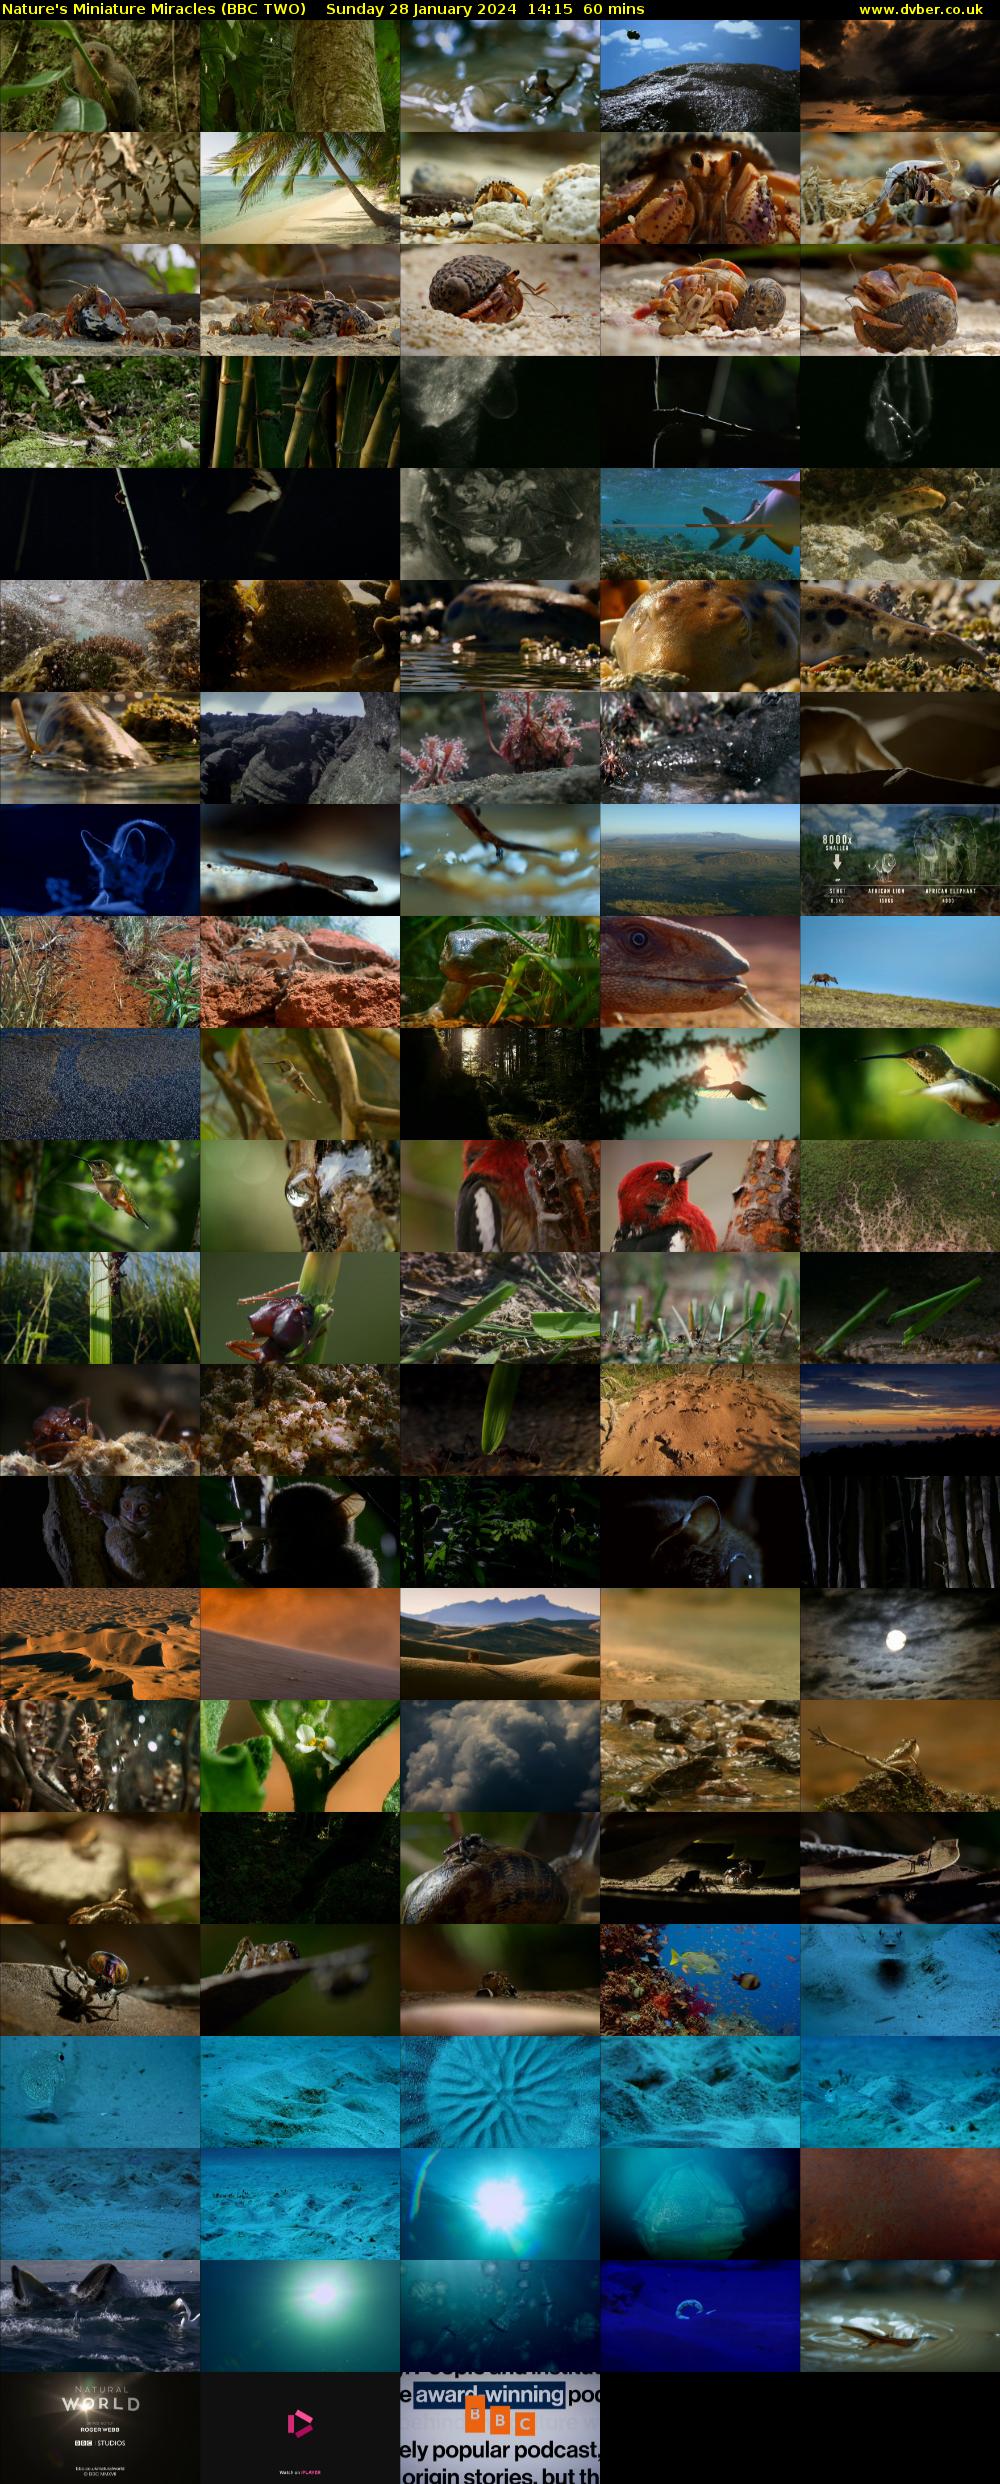 Nature's Miniature Miracles (BBC TWO) Sunday 28 January 2024 14:15 - 15:15